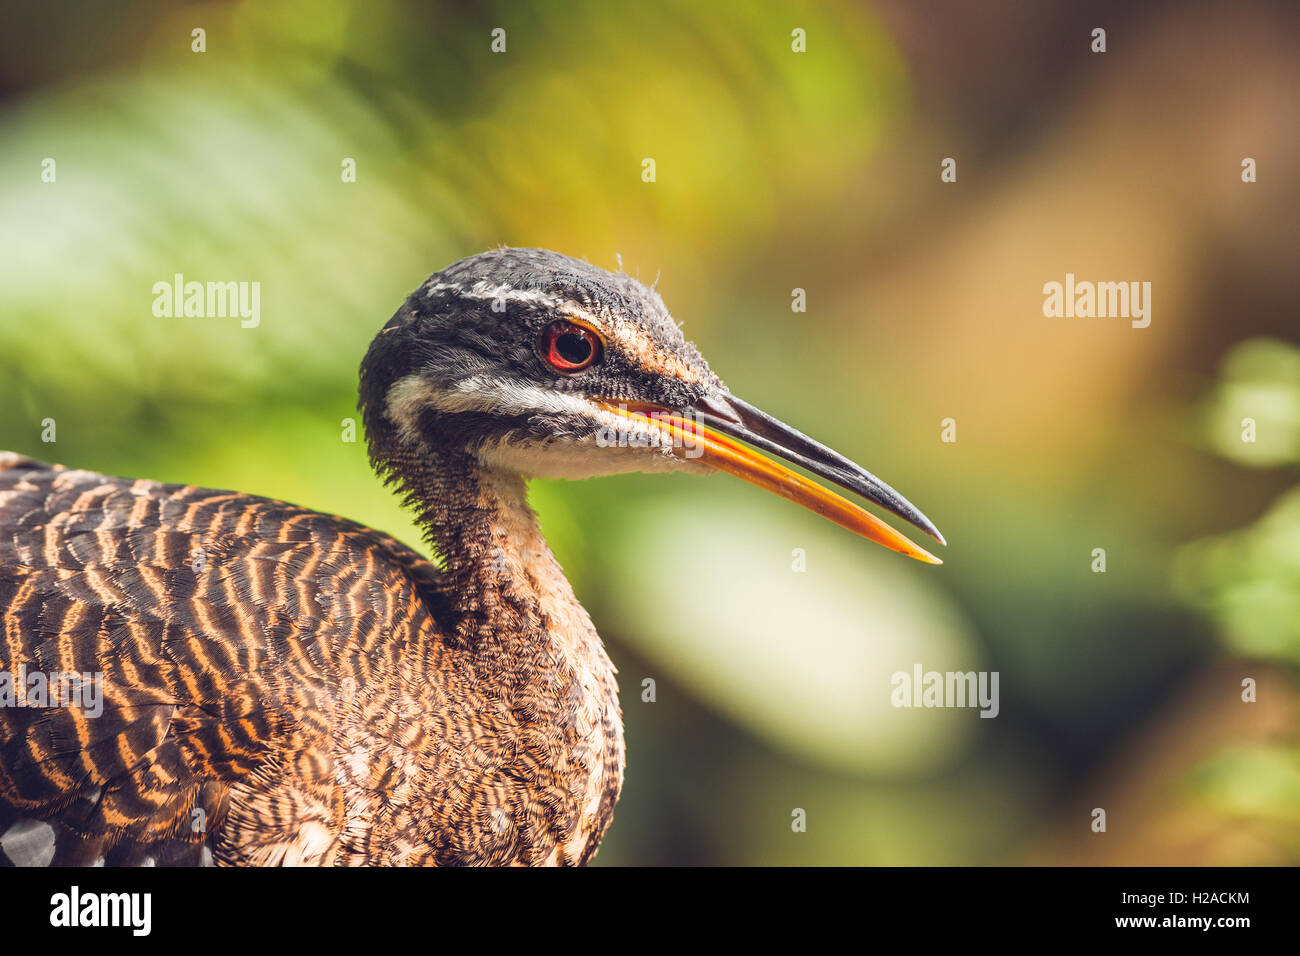 Close-up of a sunbittern bird in a colorful rainforest in bright daylight Stock Photo